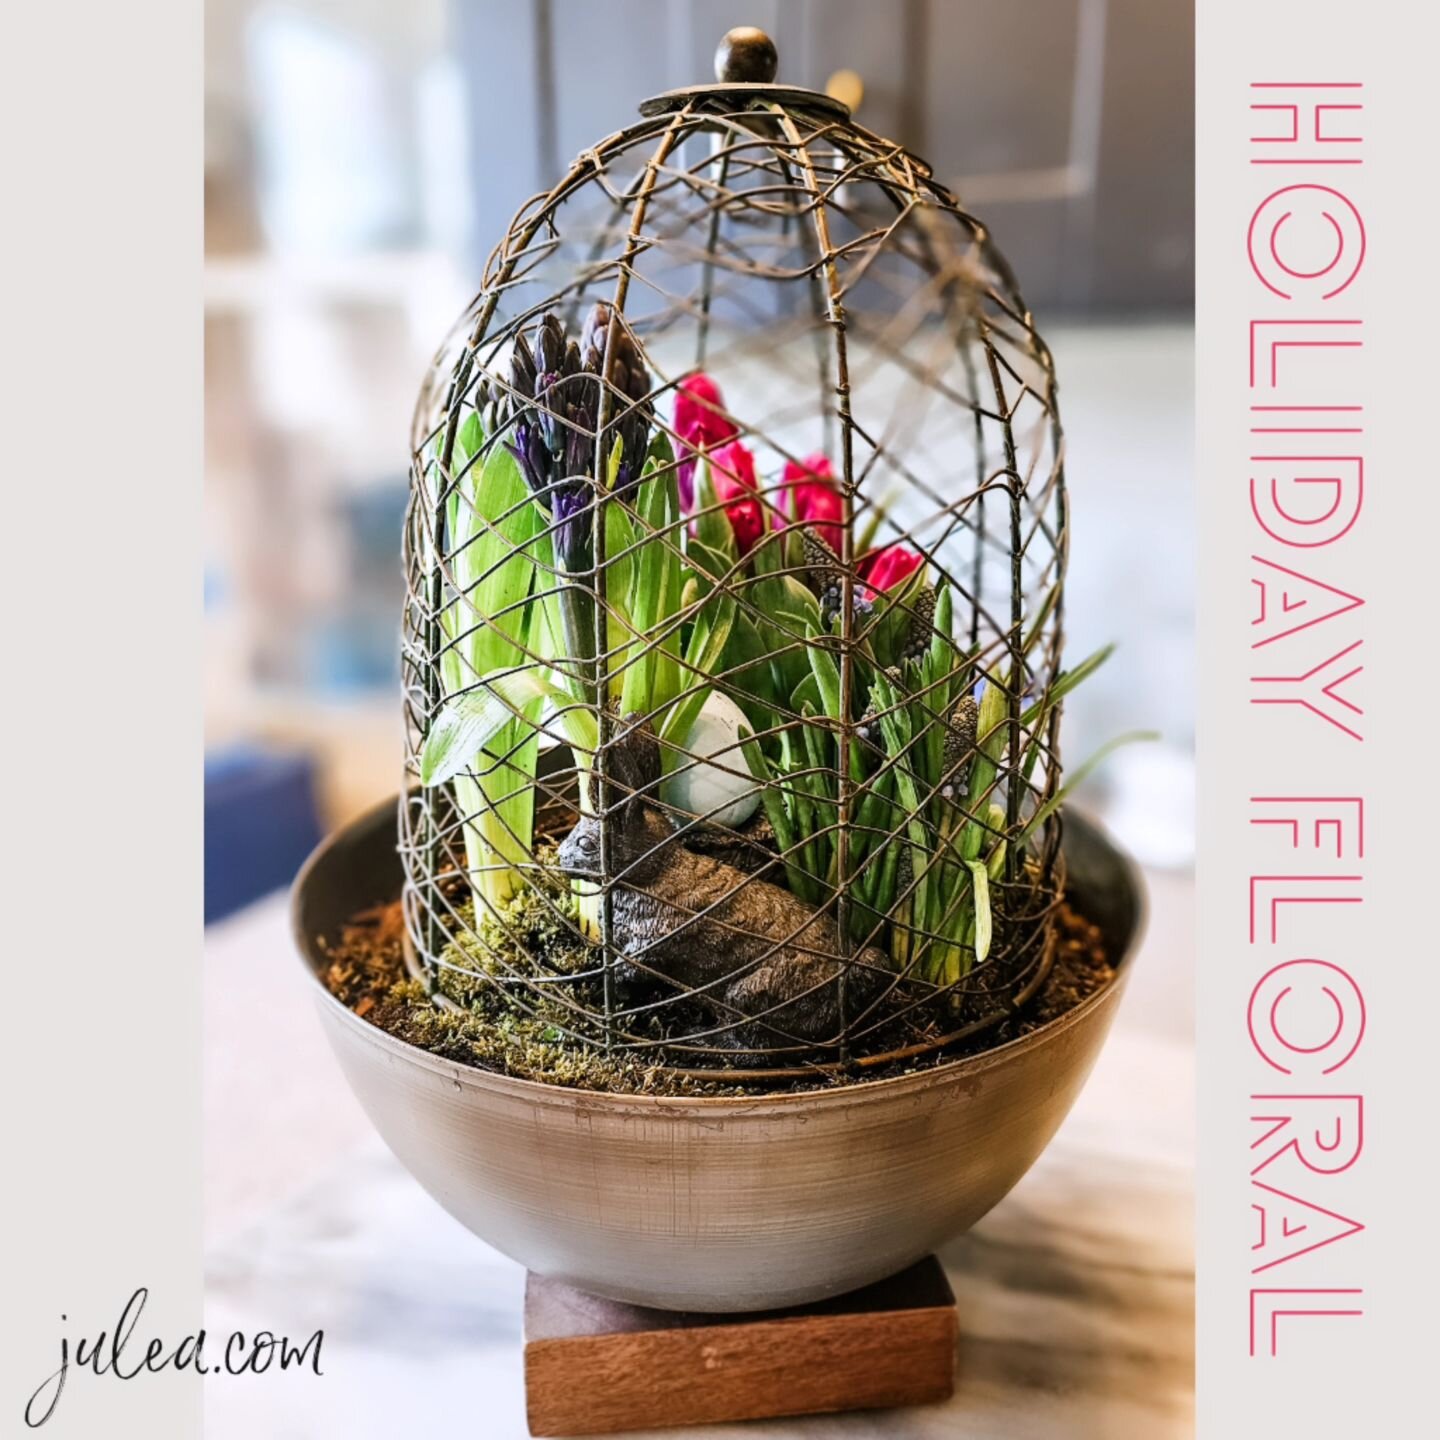 Grab a few #Aldi potted spring blooms,  pop into a decorative bowl, add soil, garden moss, pop on a wired dome - voil&agrave;, your Easter centerpiece! #aldifinds #spring #springflowers #centerpieces #flowersofinstagram #diyhomedecor #easter #easterd